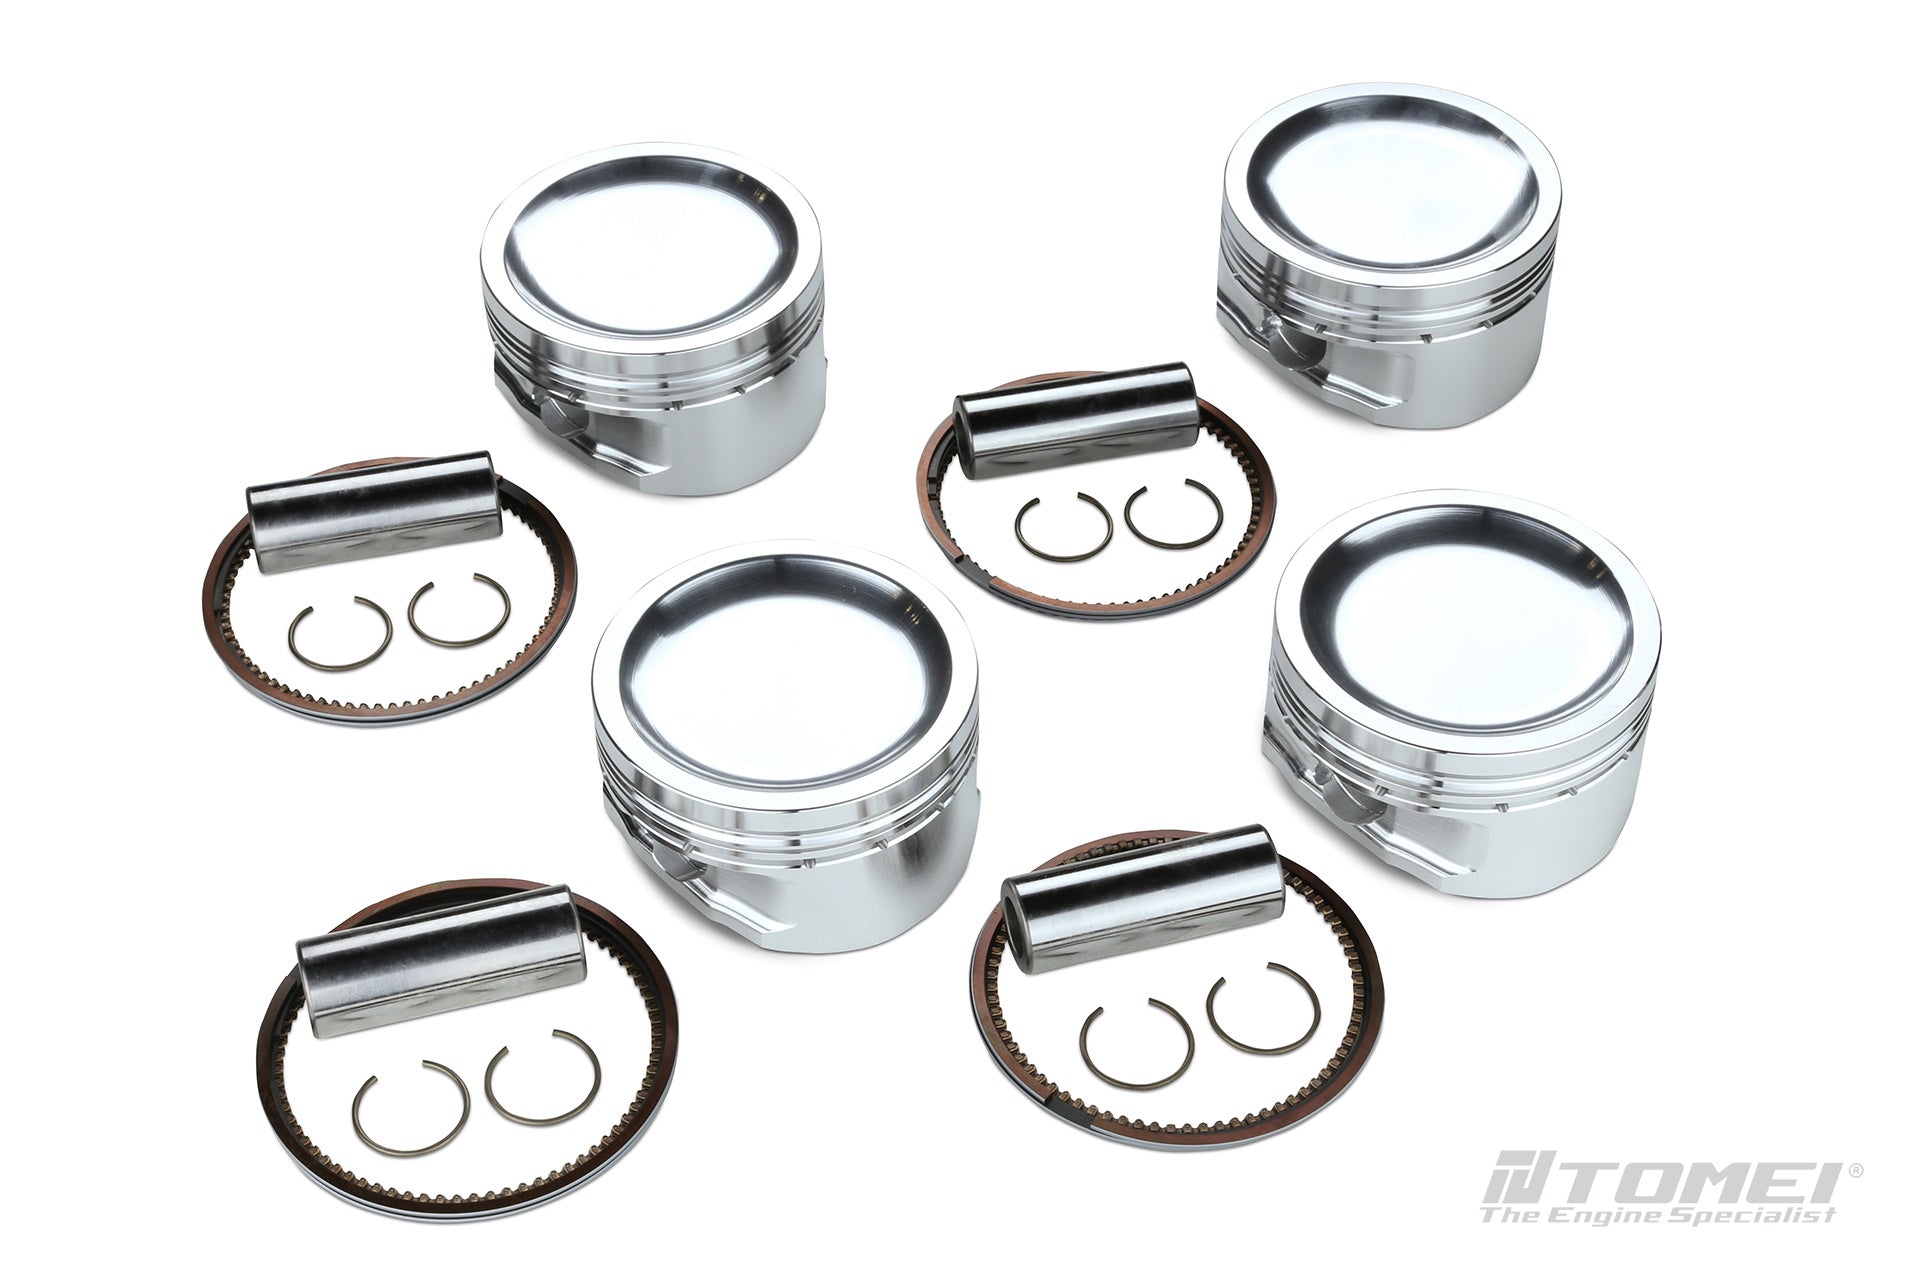 TOMEI FORGED PISTON KIT SR20DET 2.2 87.00mm (Previous Part Number 1132870211)